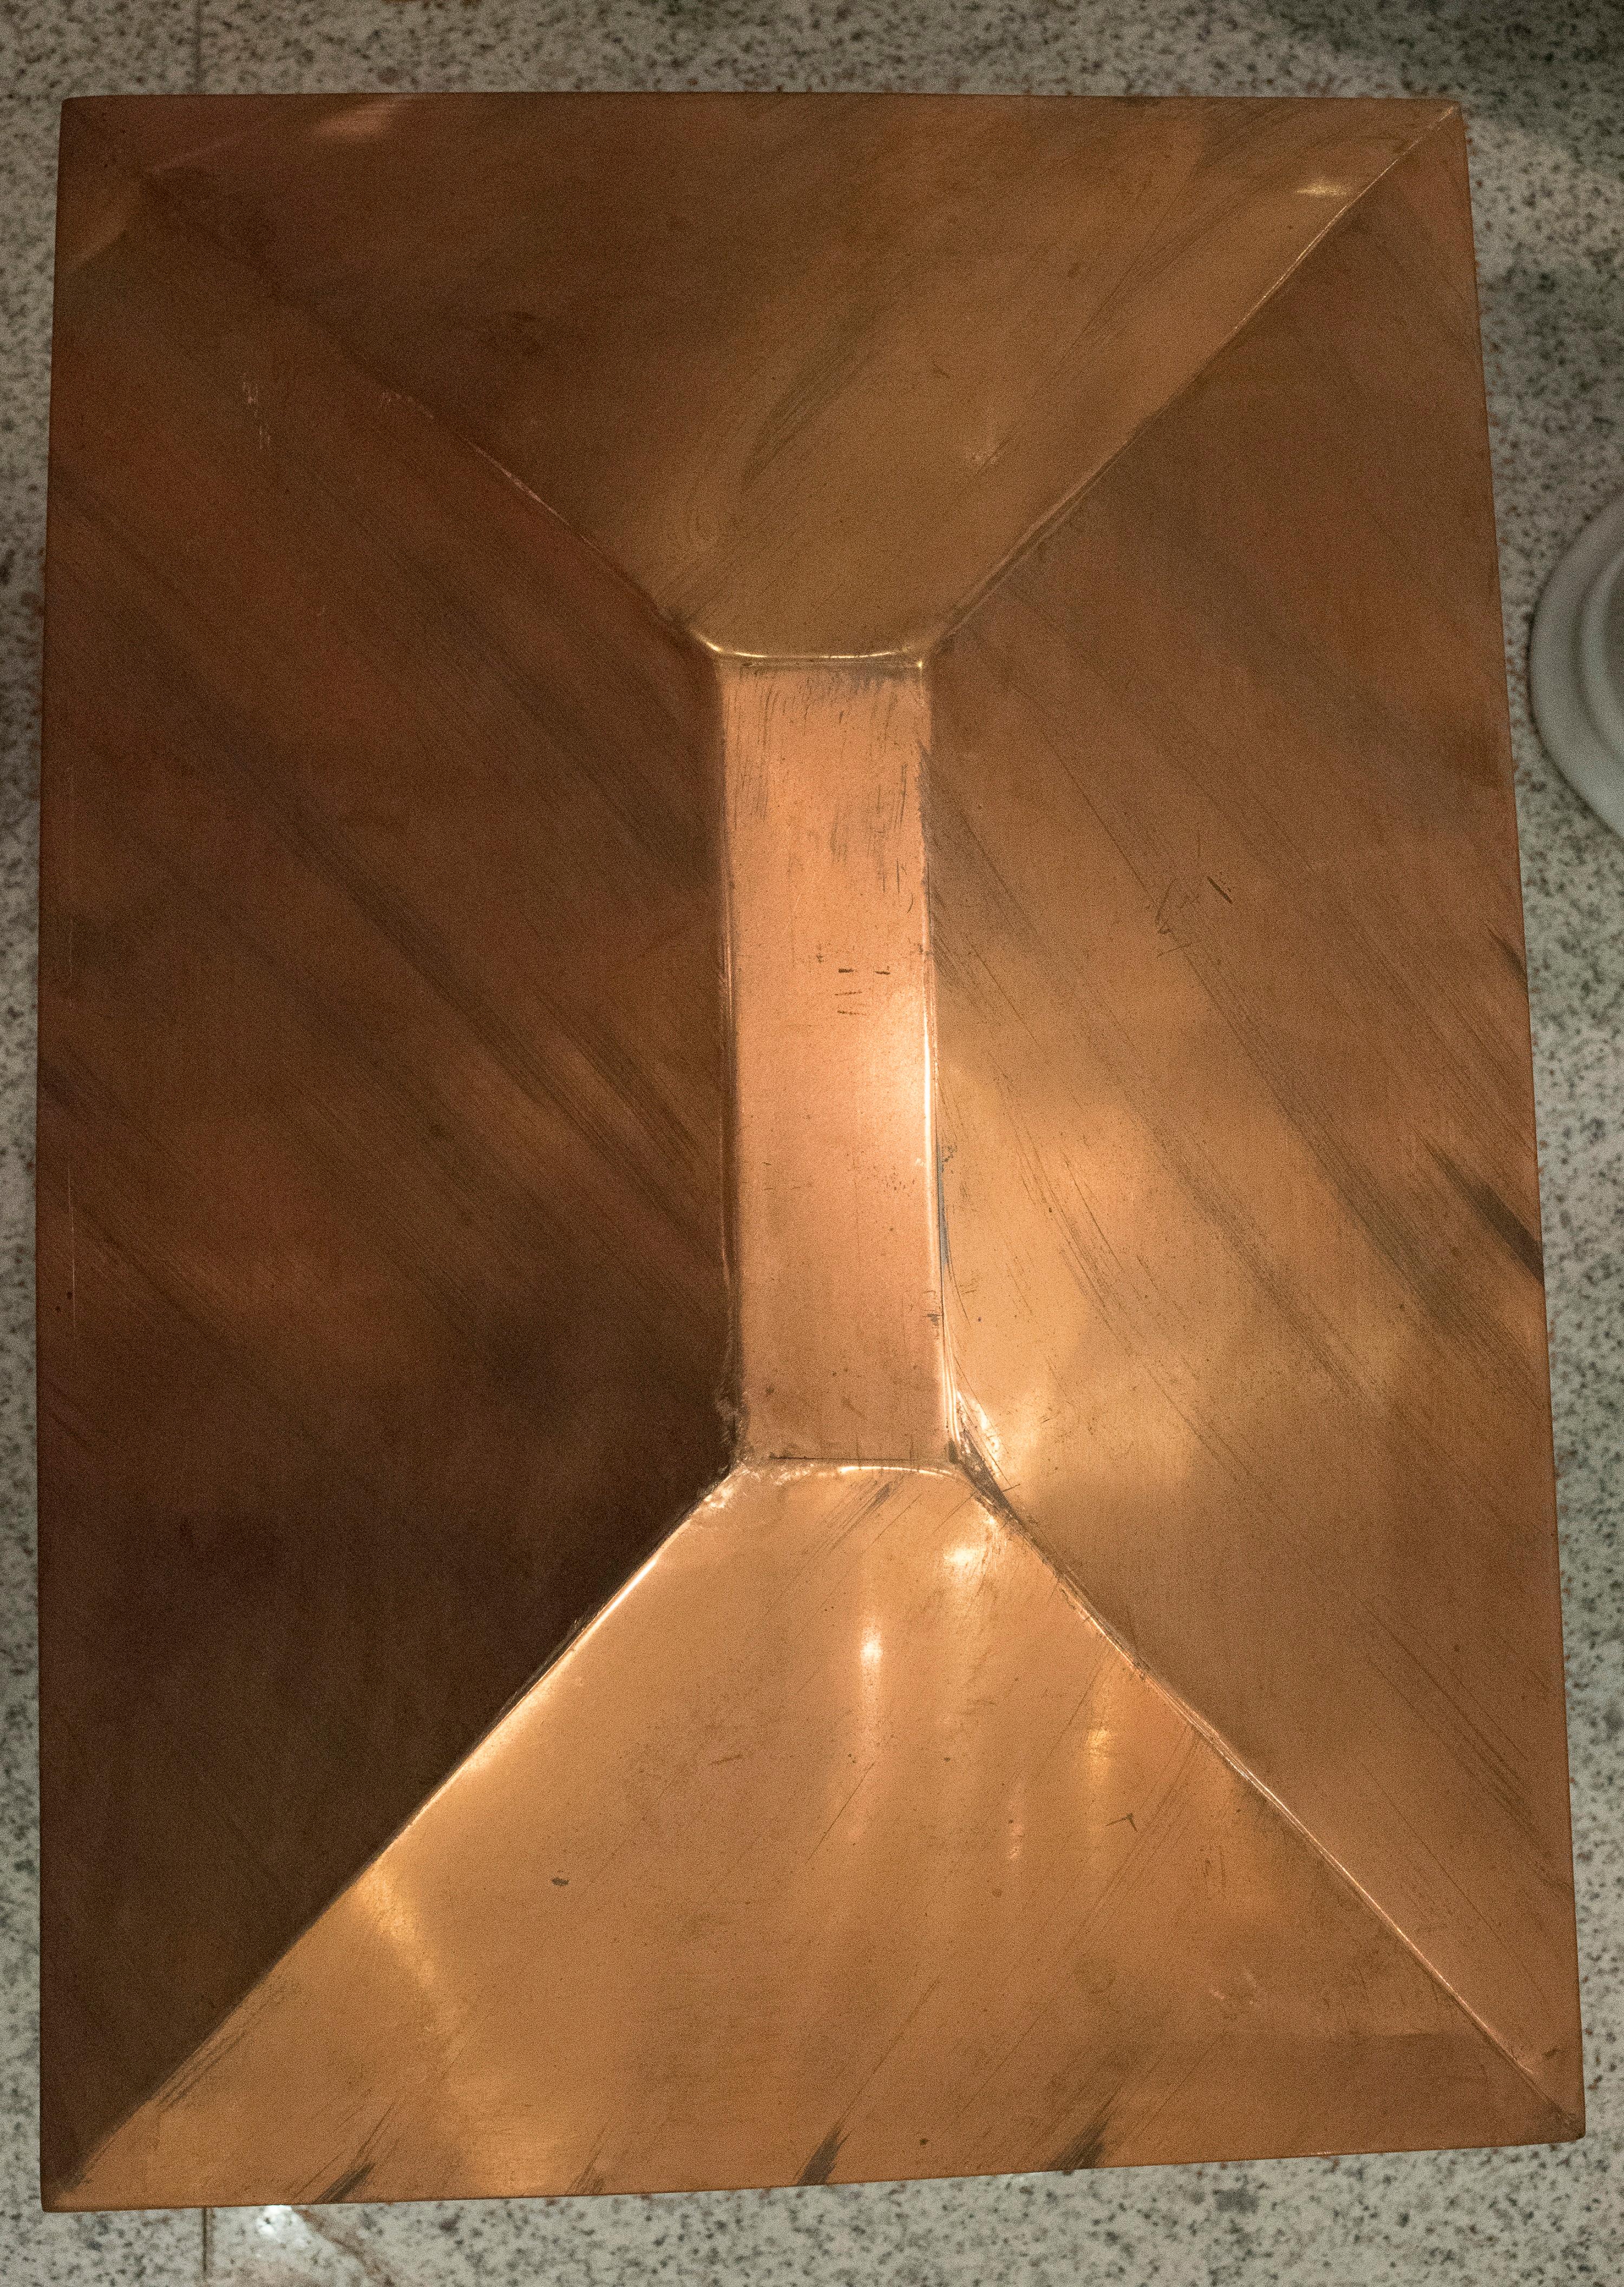 Hand-Crafted Midcentury Rectangular Copper Spanish Design Photophores for Light or Candles